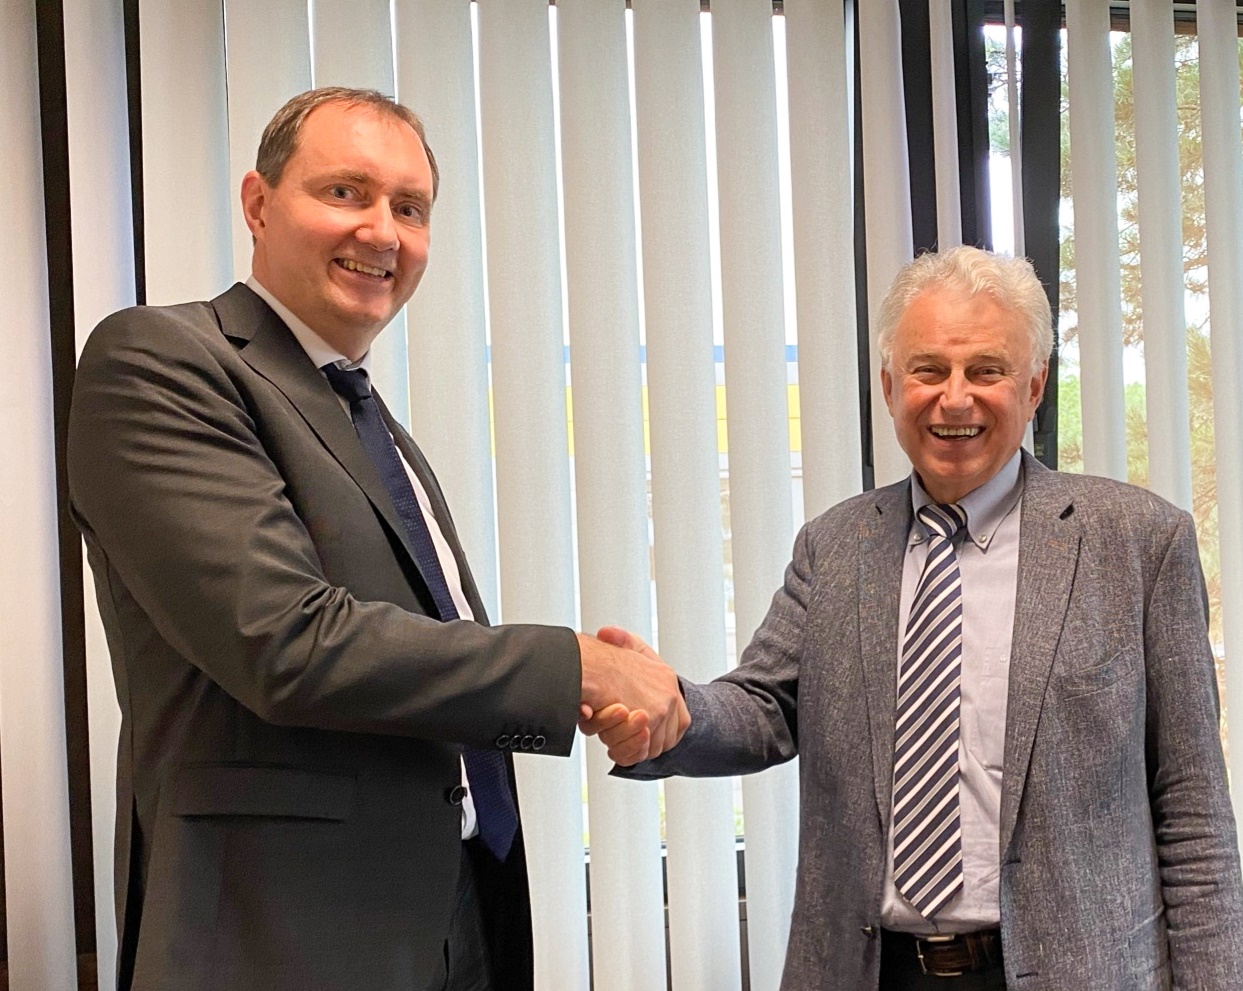 Pictured : Digatron's founder & Chairman Rolf Beckers (right) and Holger Driesch (left)